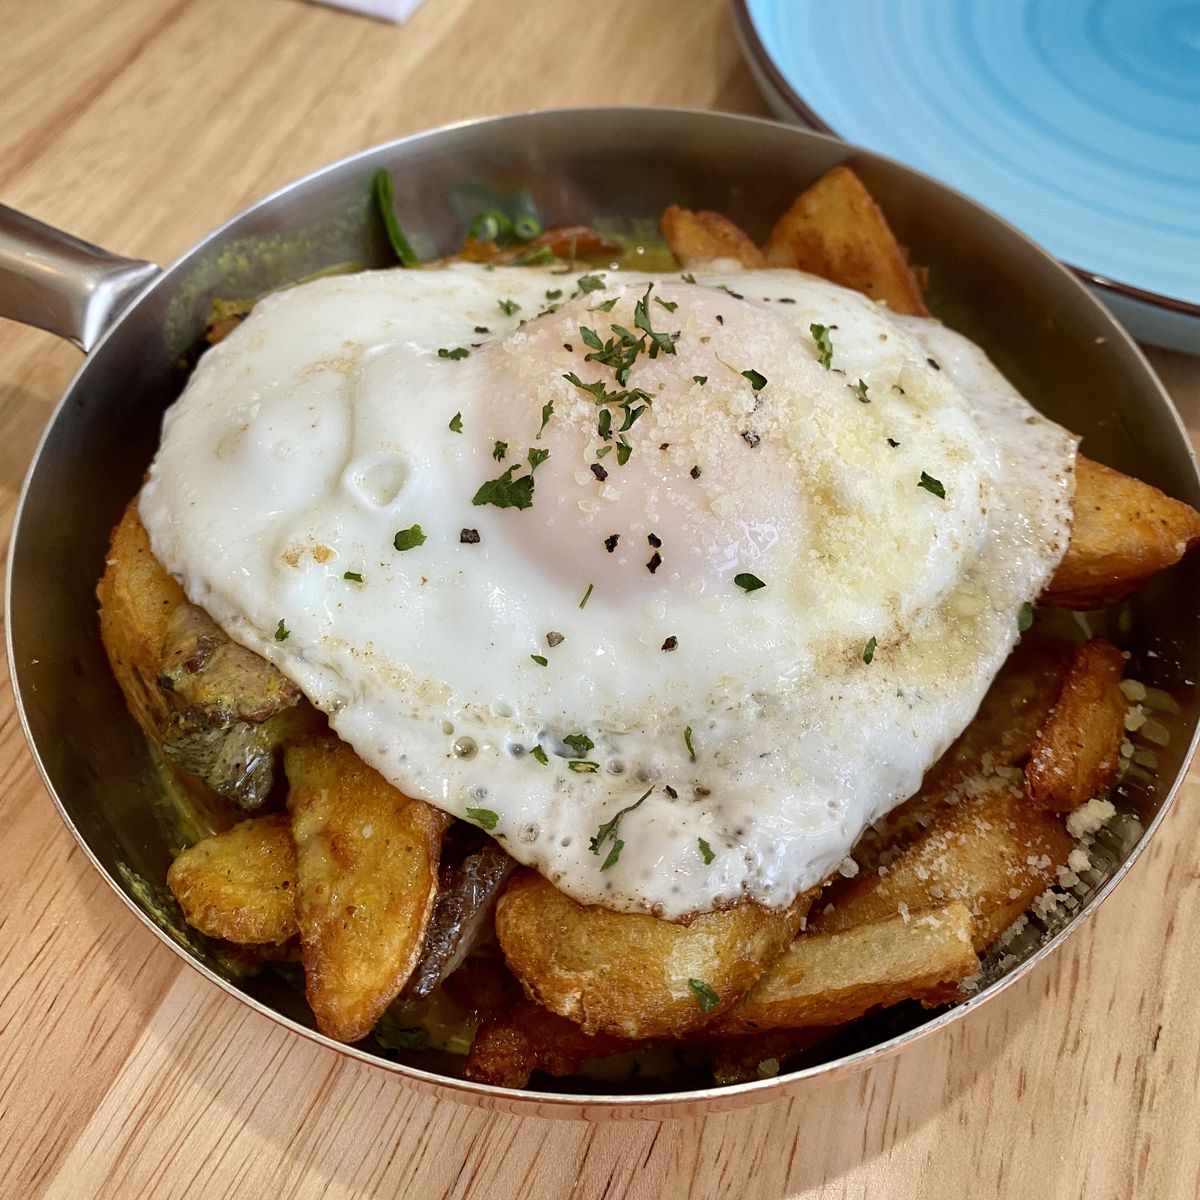 A small pan of potatoes topped with an overeasy egg.